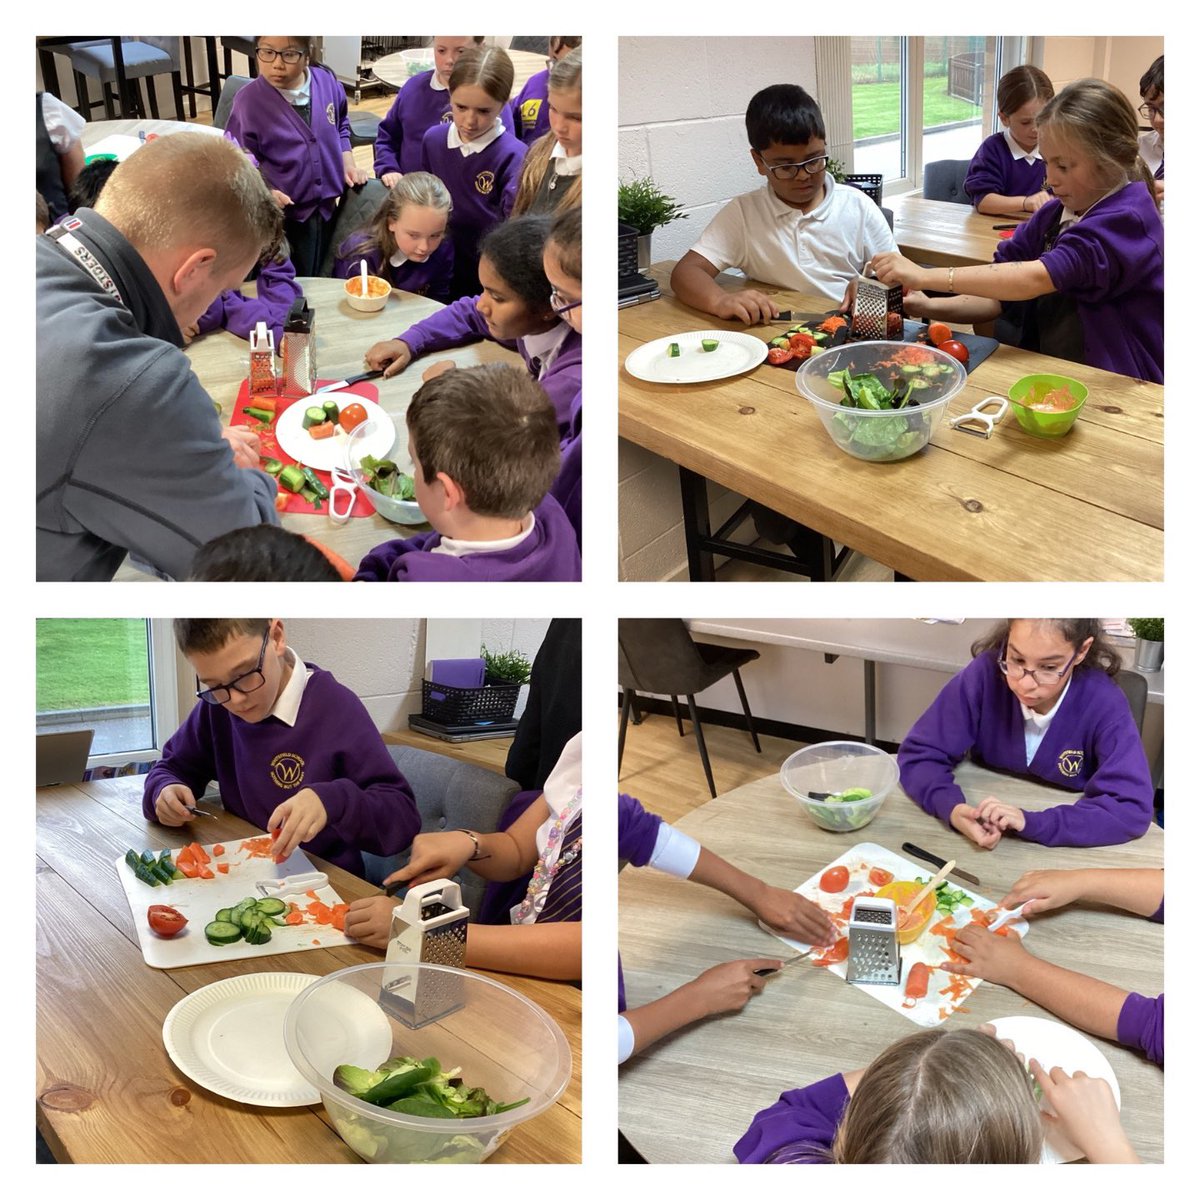 5A made a Mezze Bowl using lots of different fresh ingredients like carrot, cucumber, tomato, chickpeas and pomegranate. We even made our own harissa dressing with yogurt! ⭐️ We practiced our chopping, peeling and grating skills